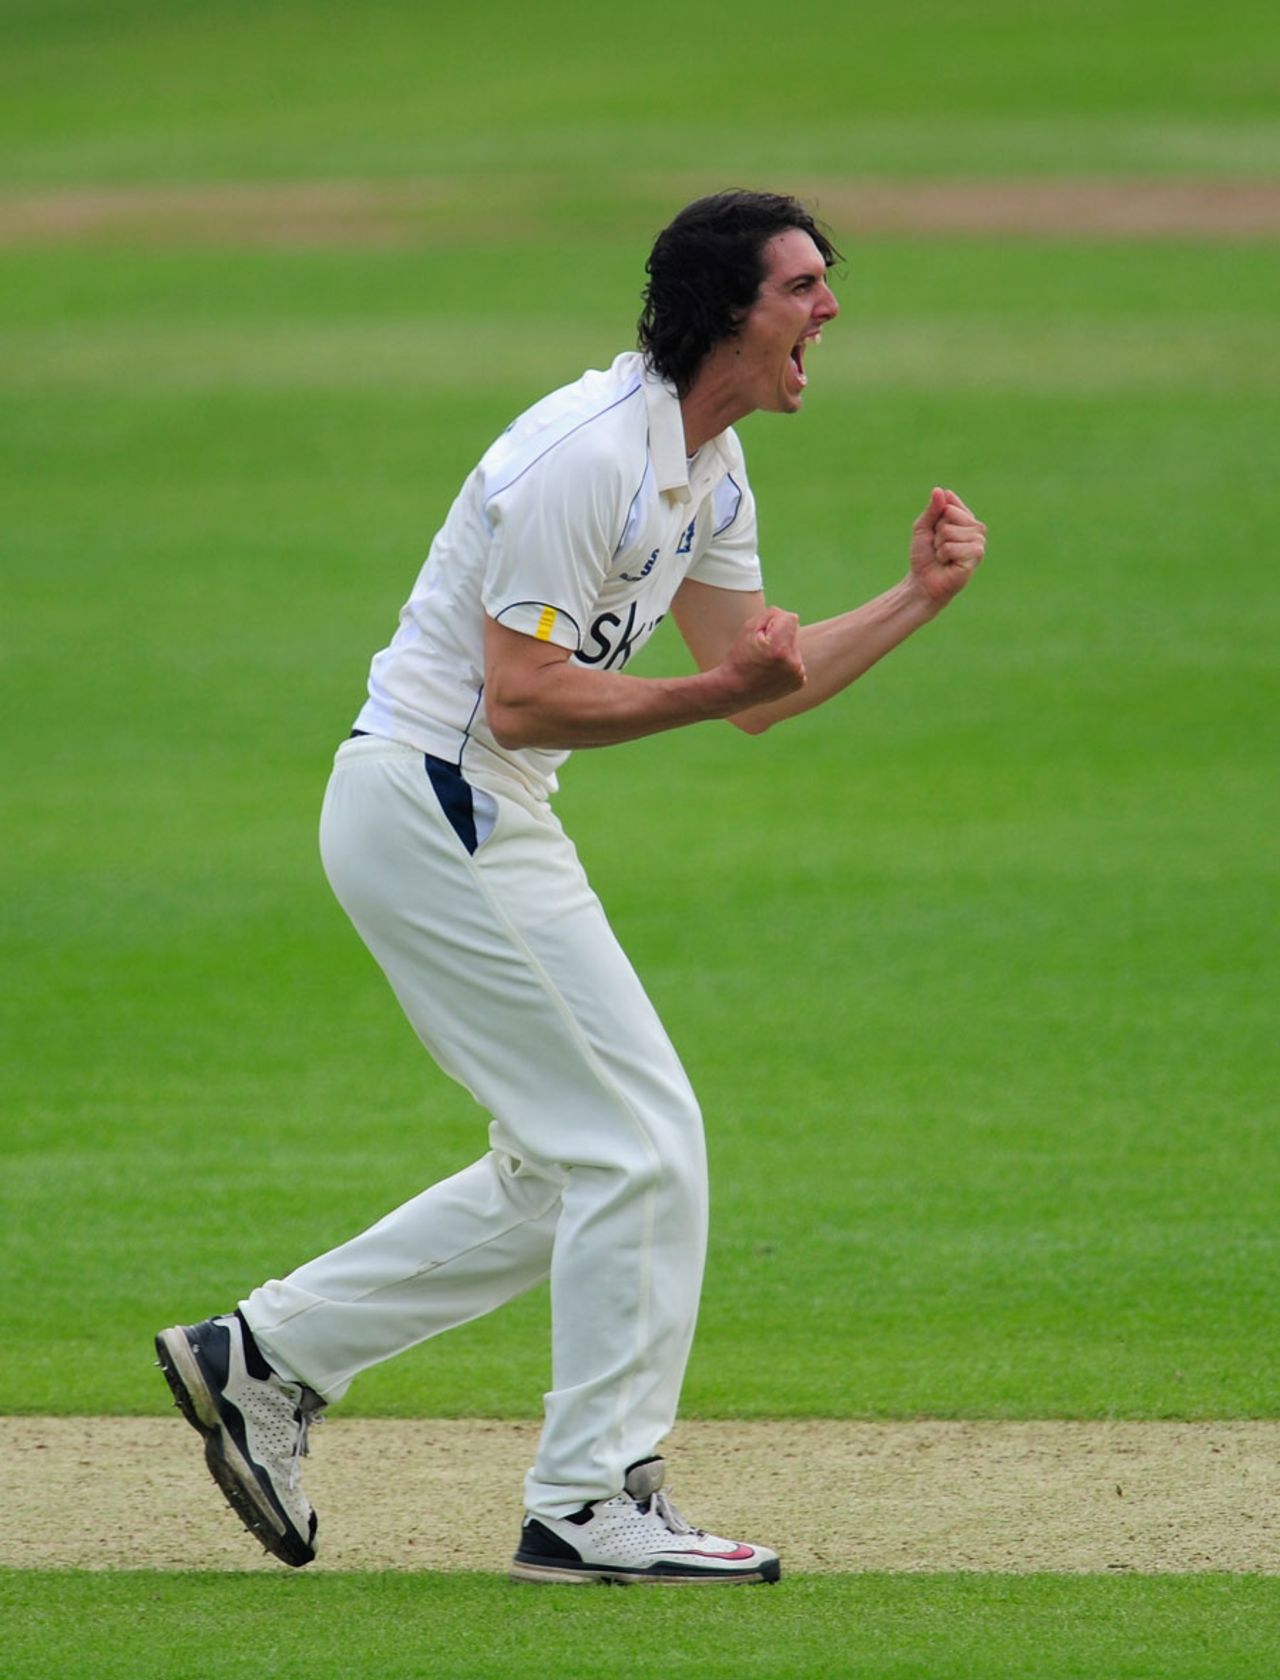 Chris Wright celebrates taking a wicket, Warwickshire v Durham, County Championship, Division One, Edgbaston, 1st day, May 2, 2012